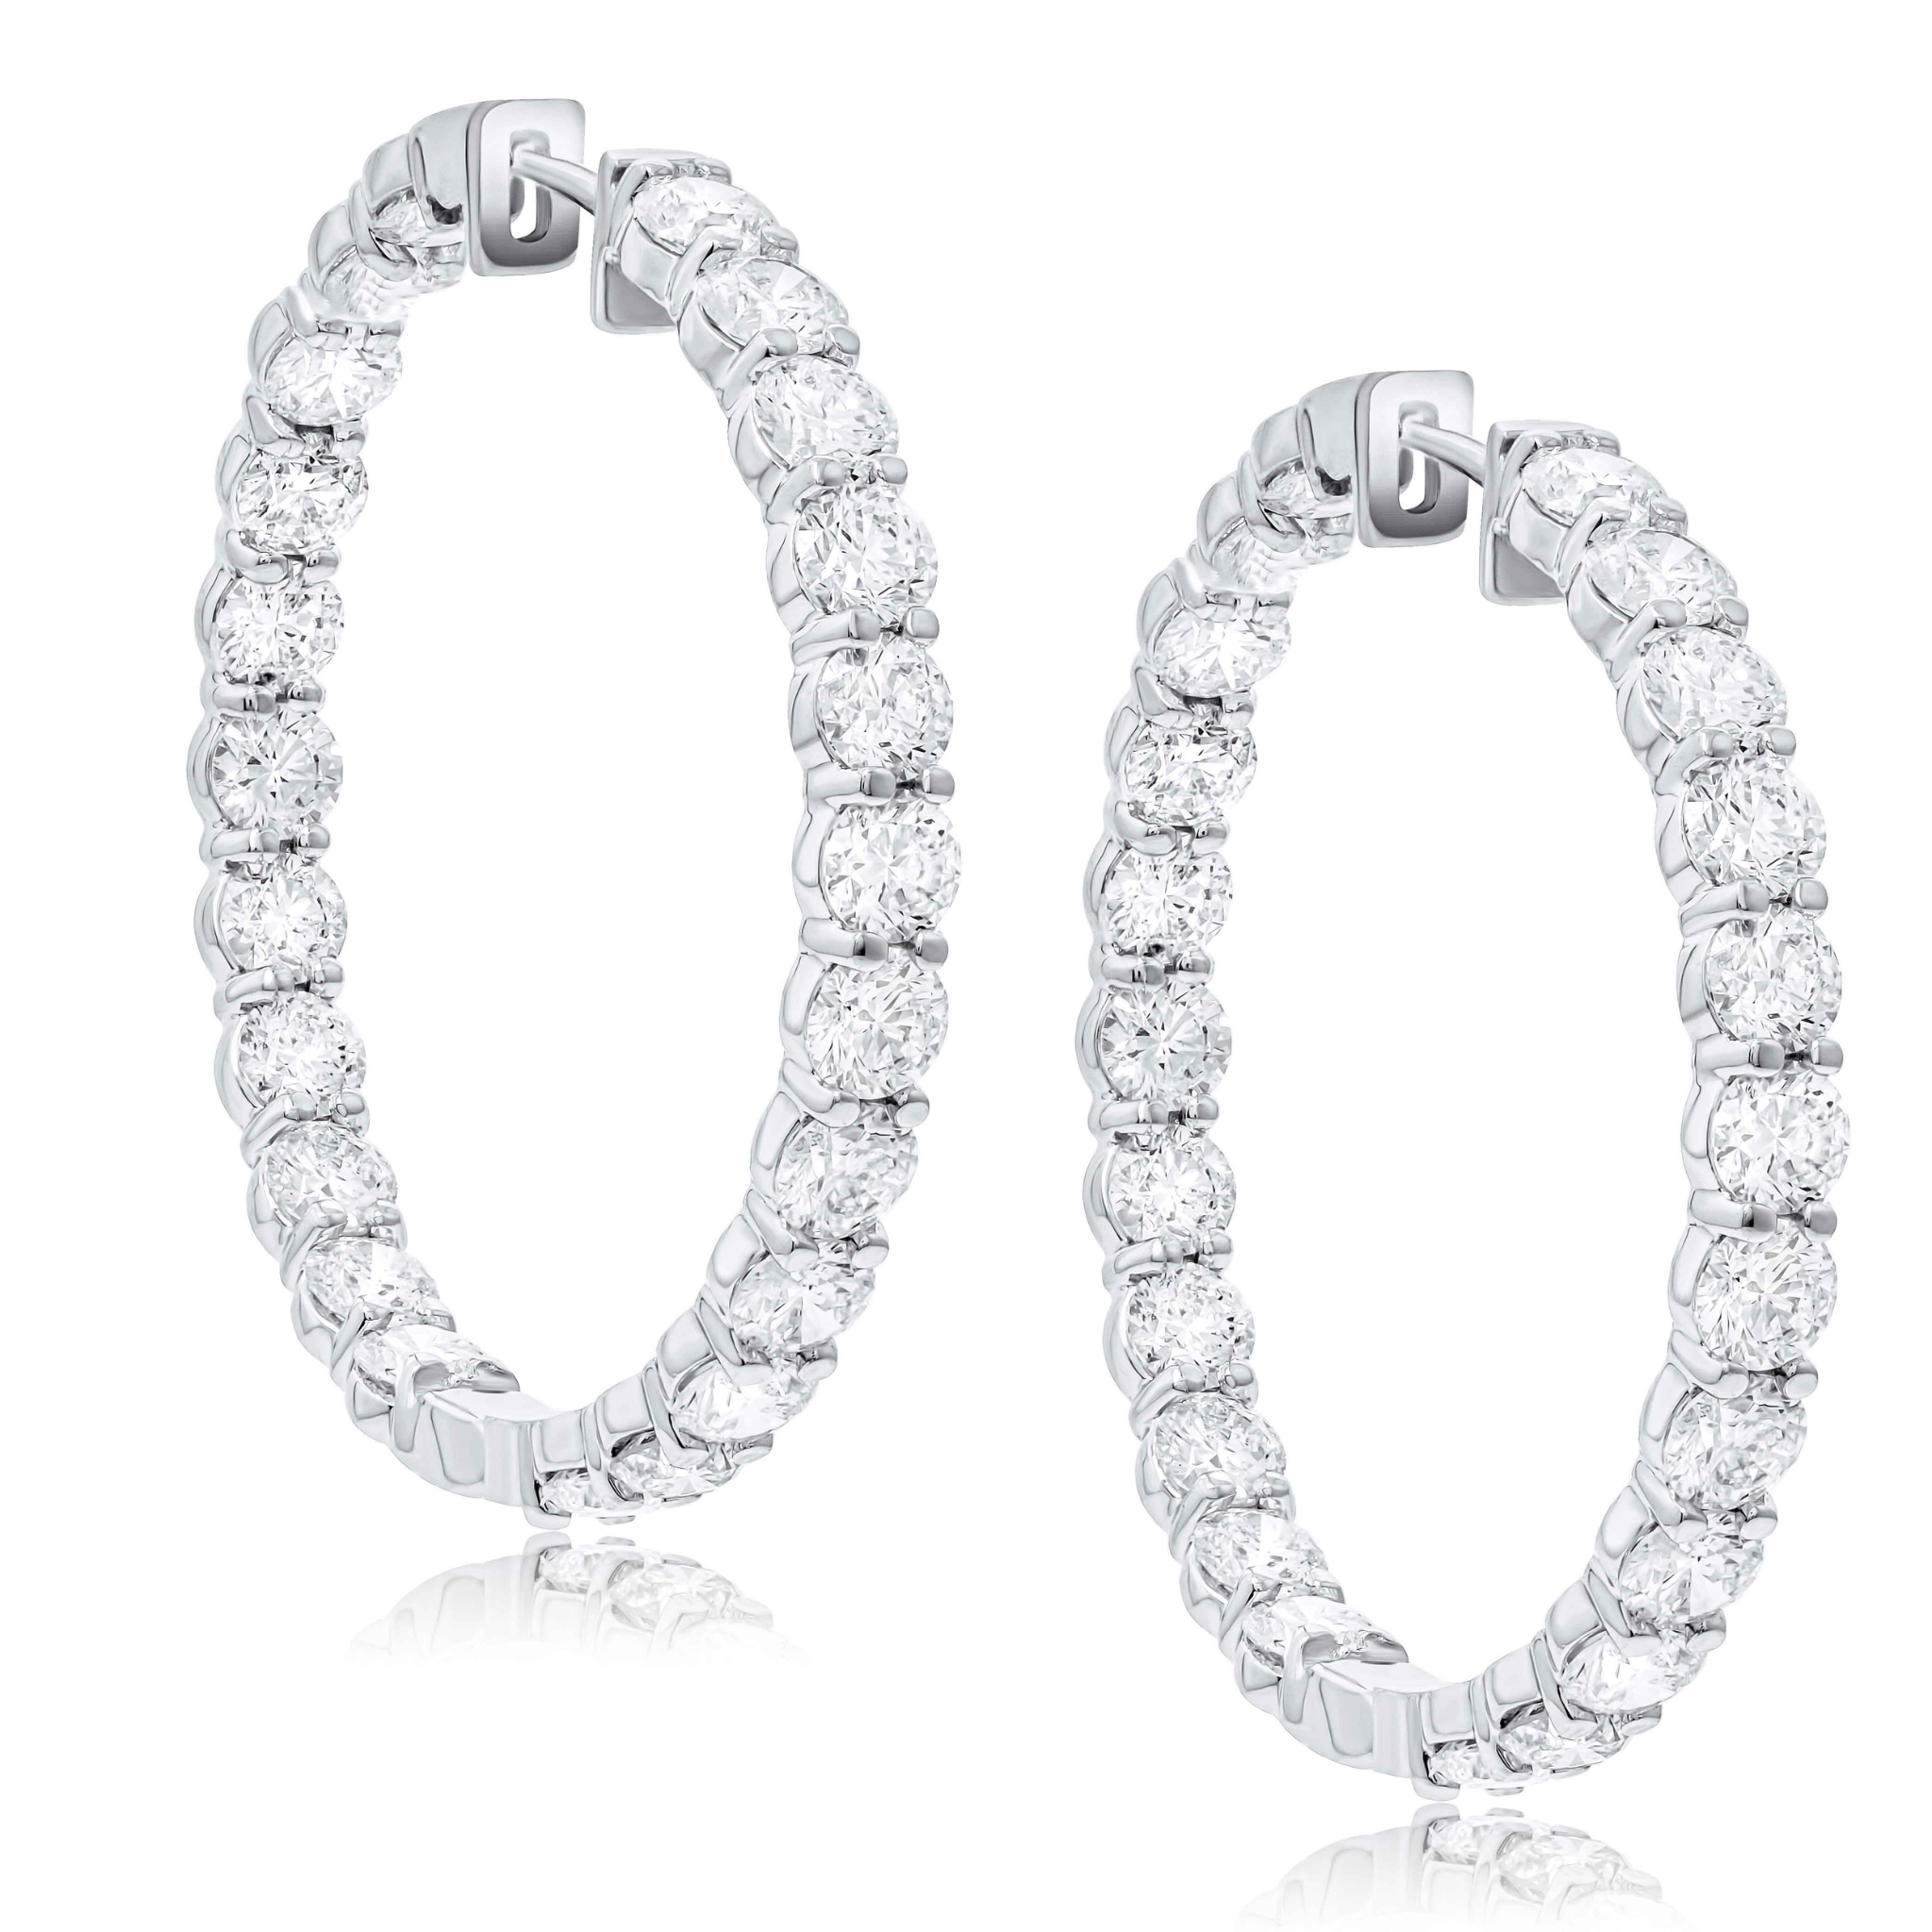 18 Kt White Gold Hoop Earrings with 15.10 cts.jpg